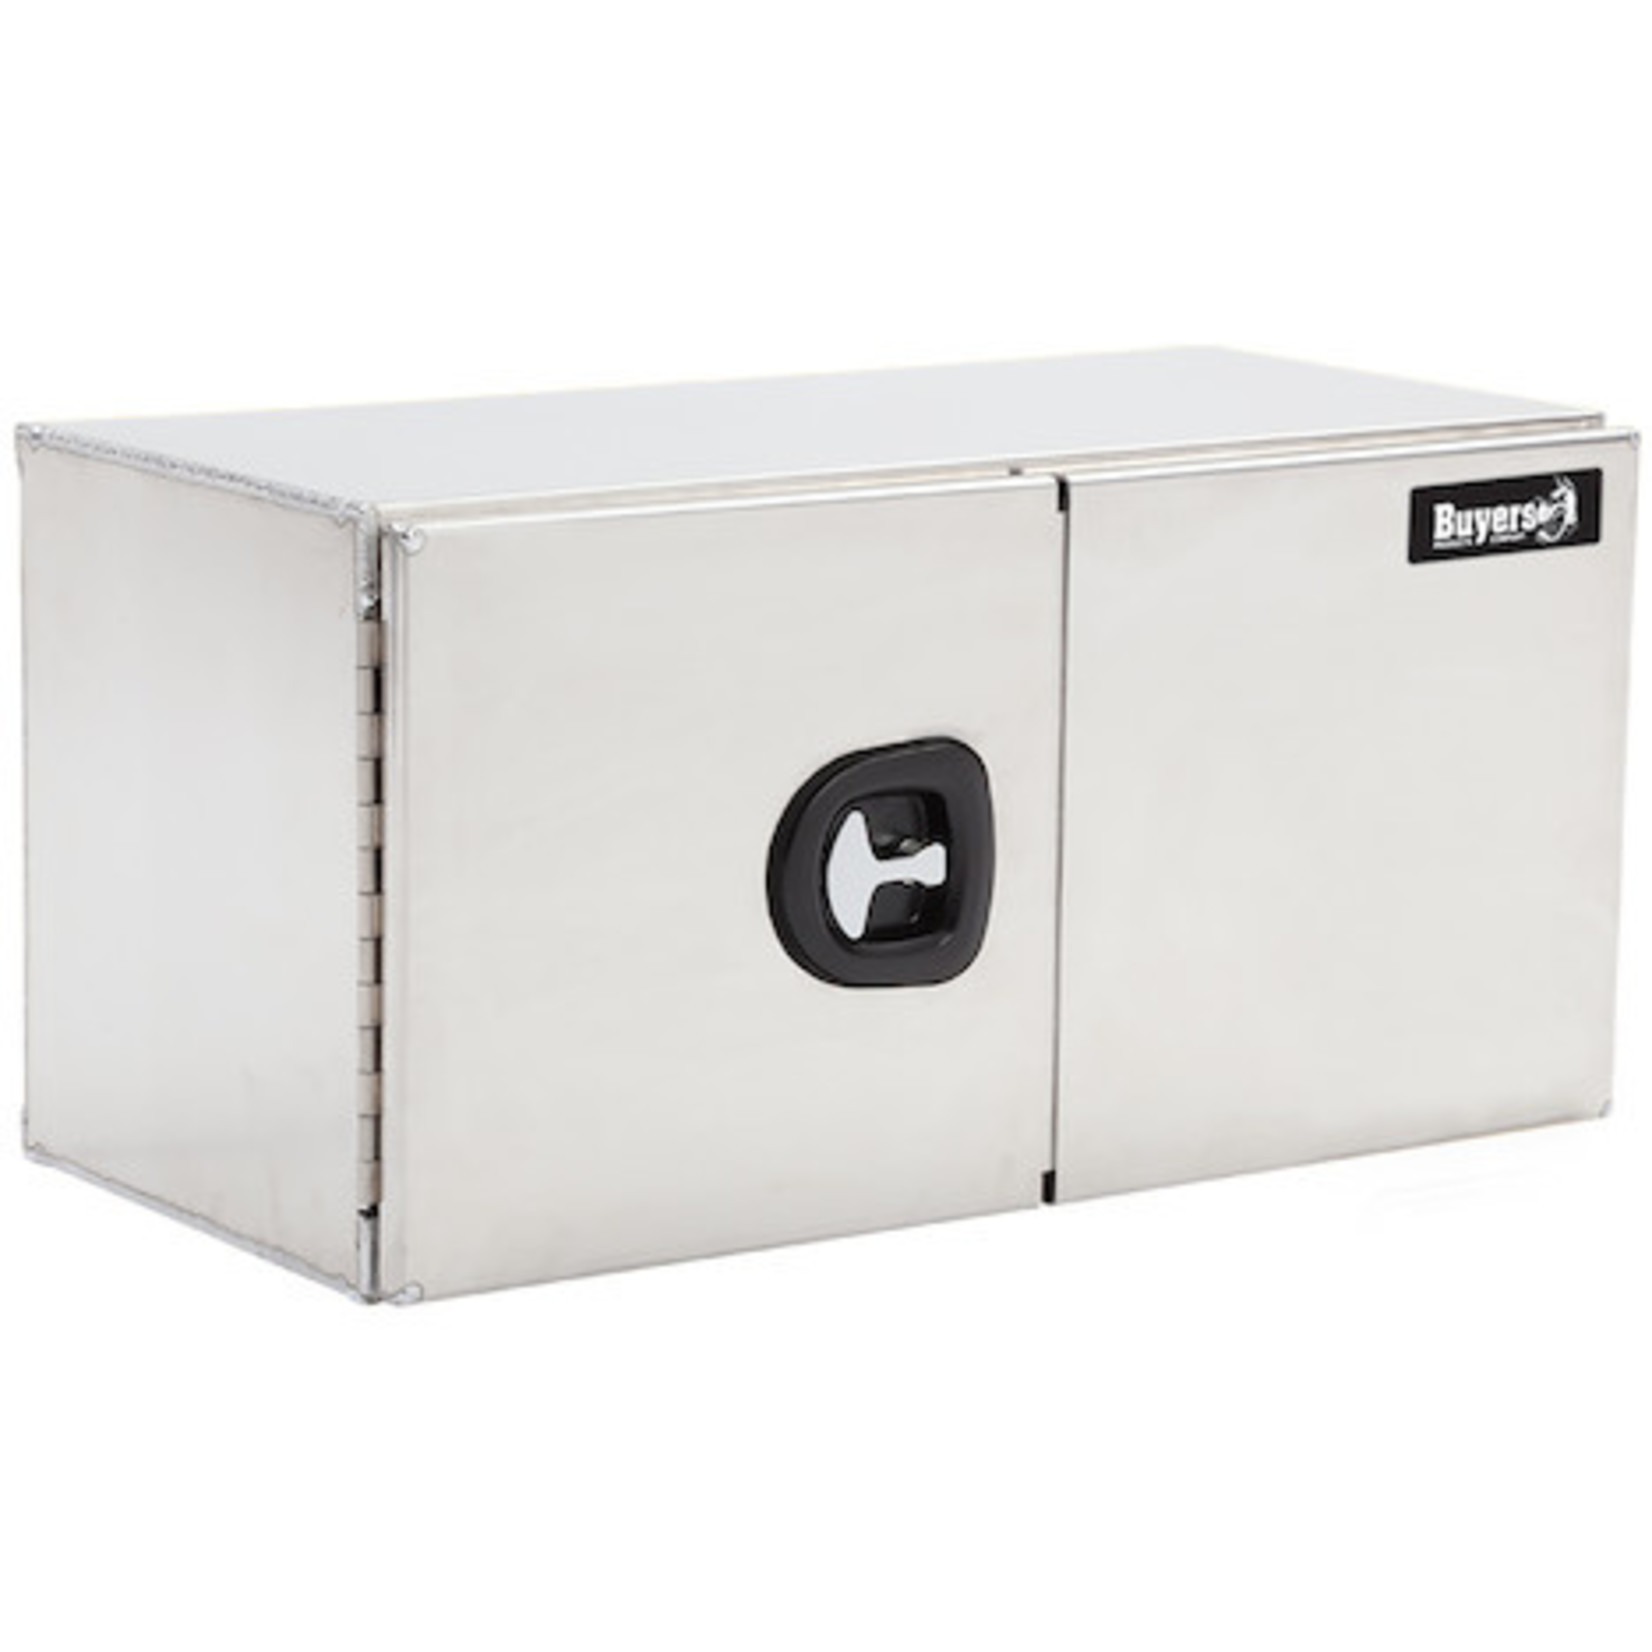 Buyers Products Company Smooth Aluminum Underbody Truck Box with Barn Door Series